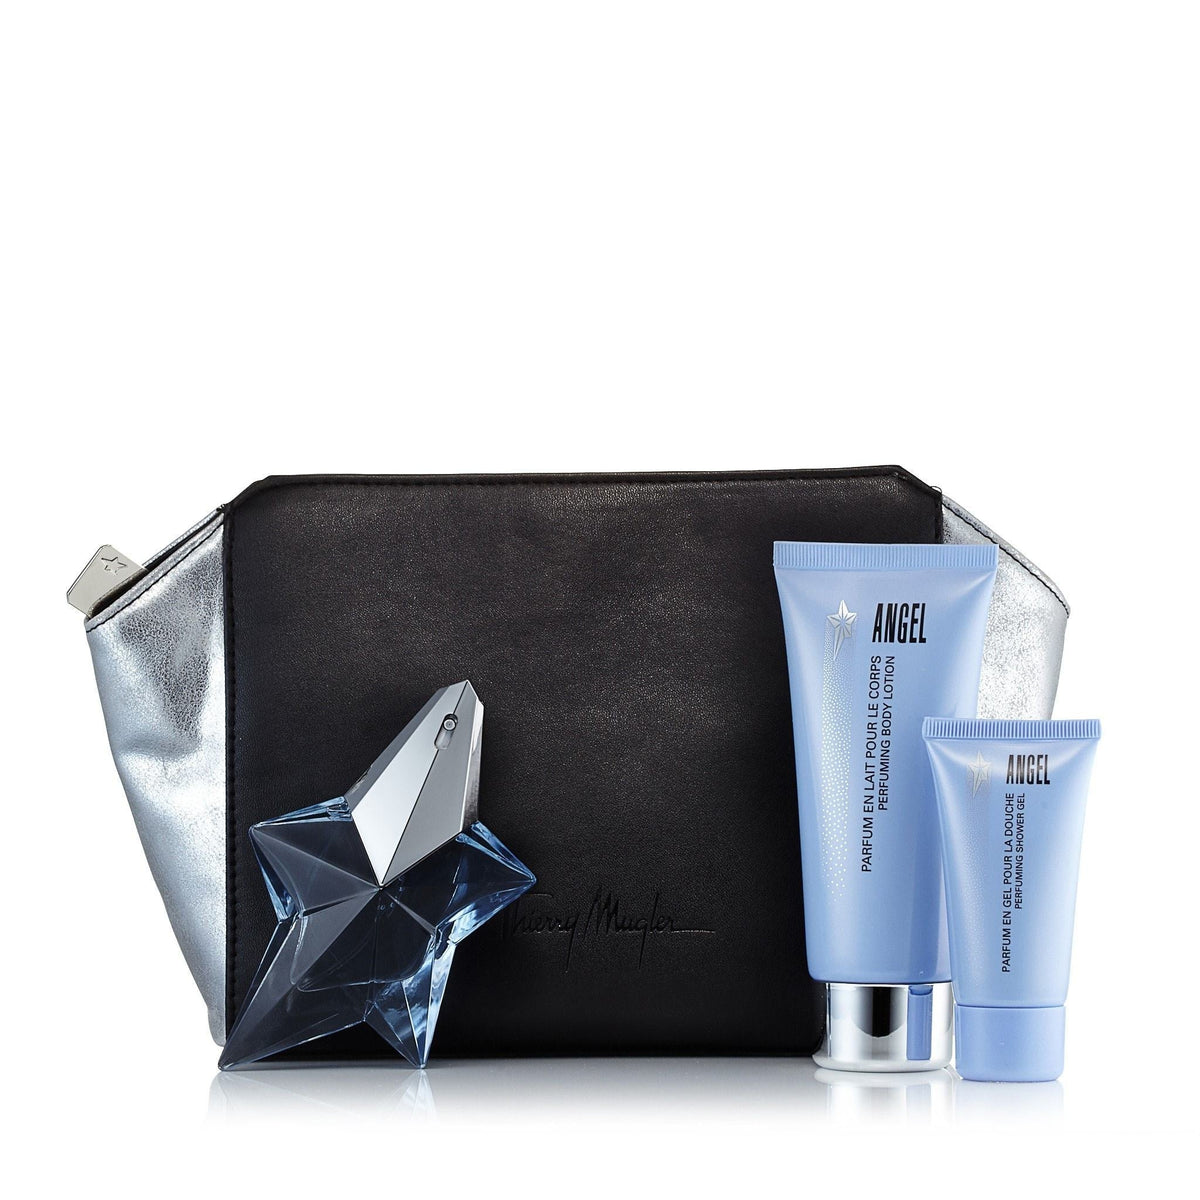 Angel Gift Set for Women by Thierry Mugler 0.8 oz.